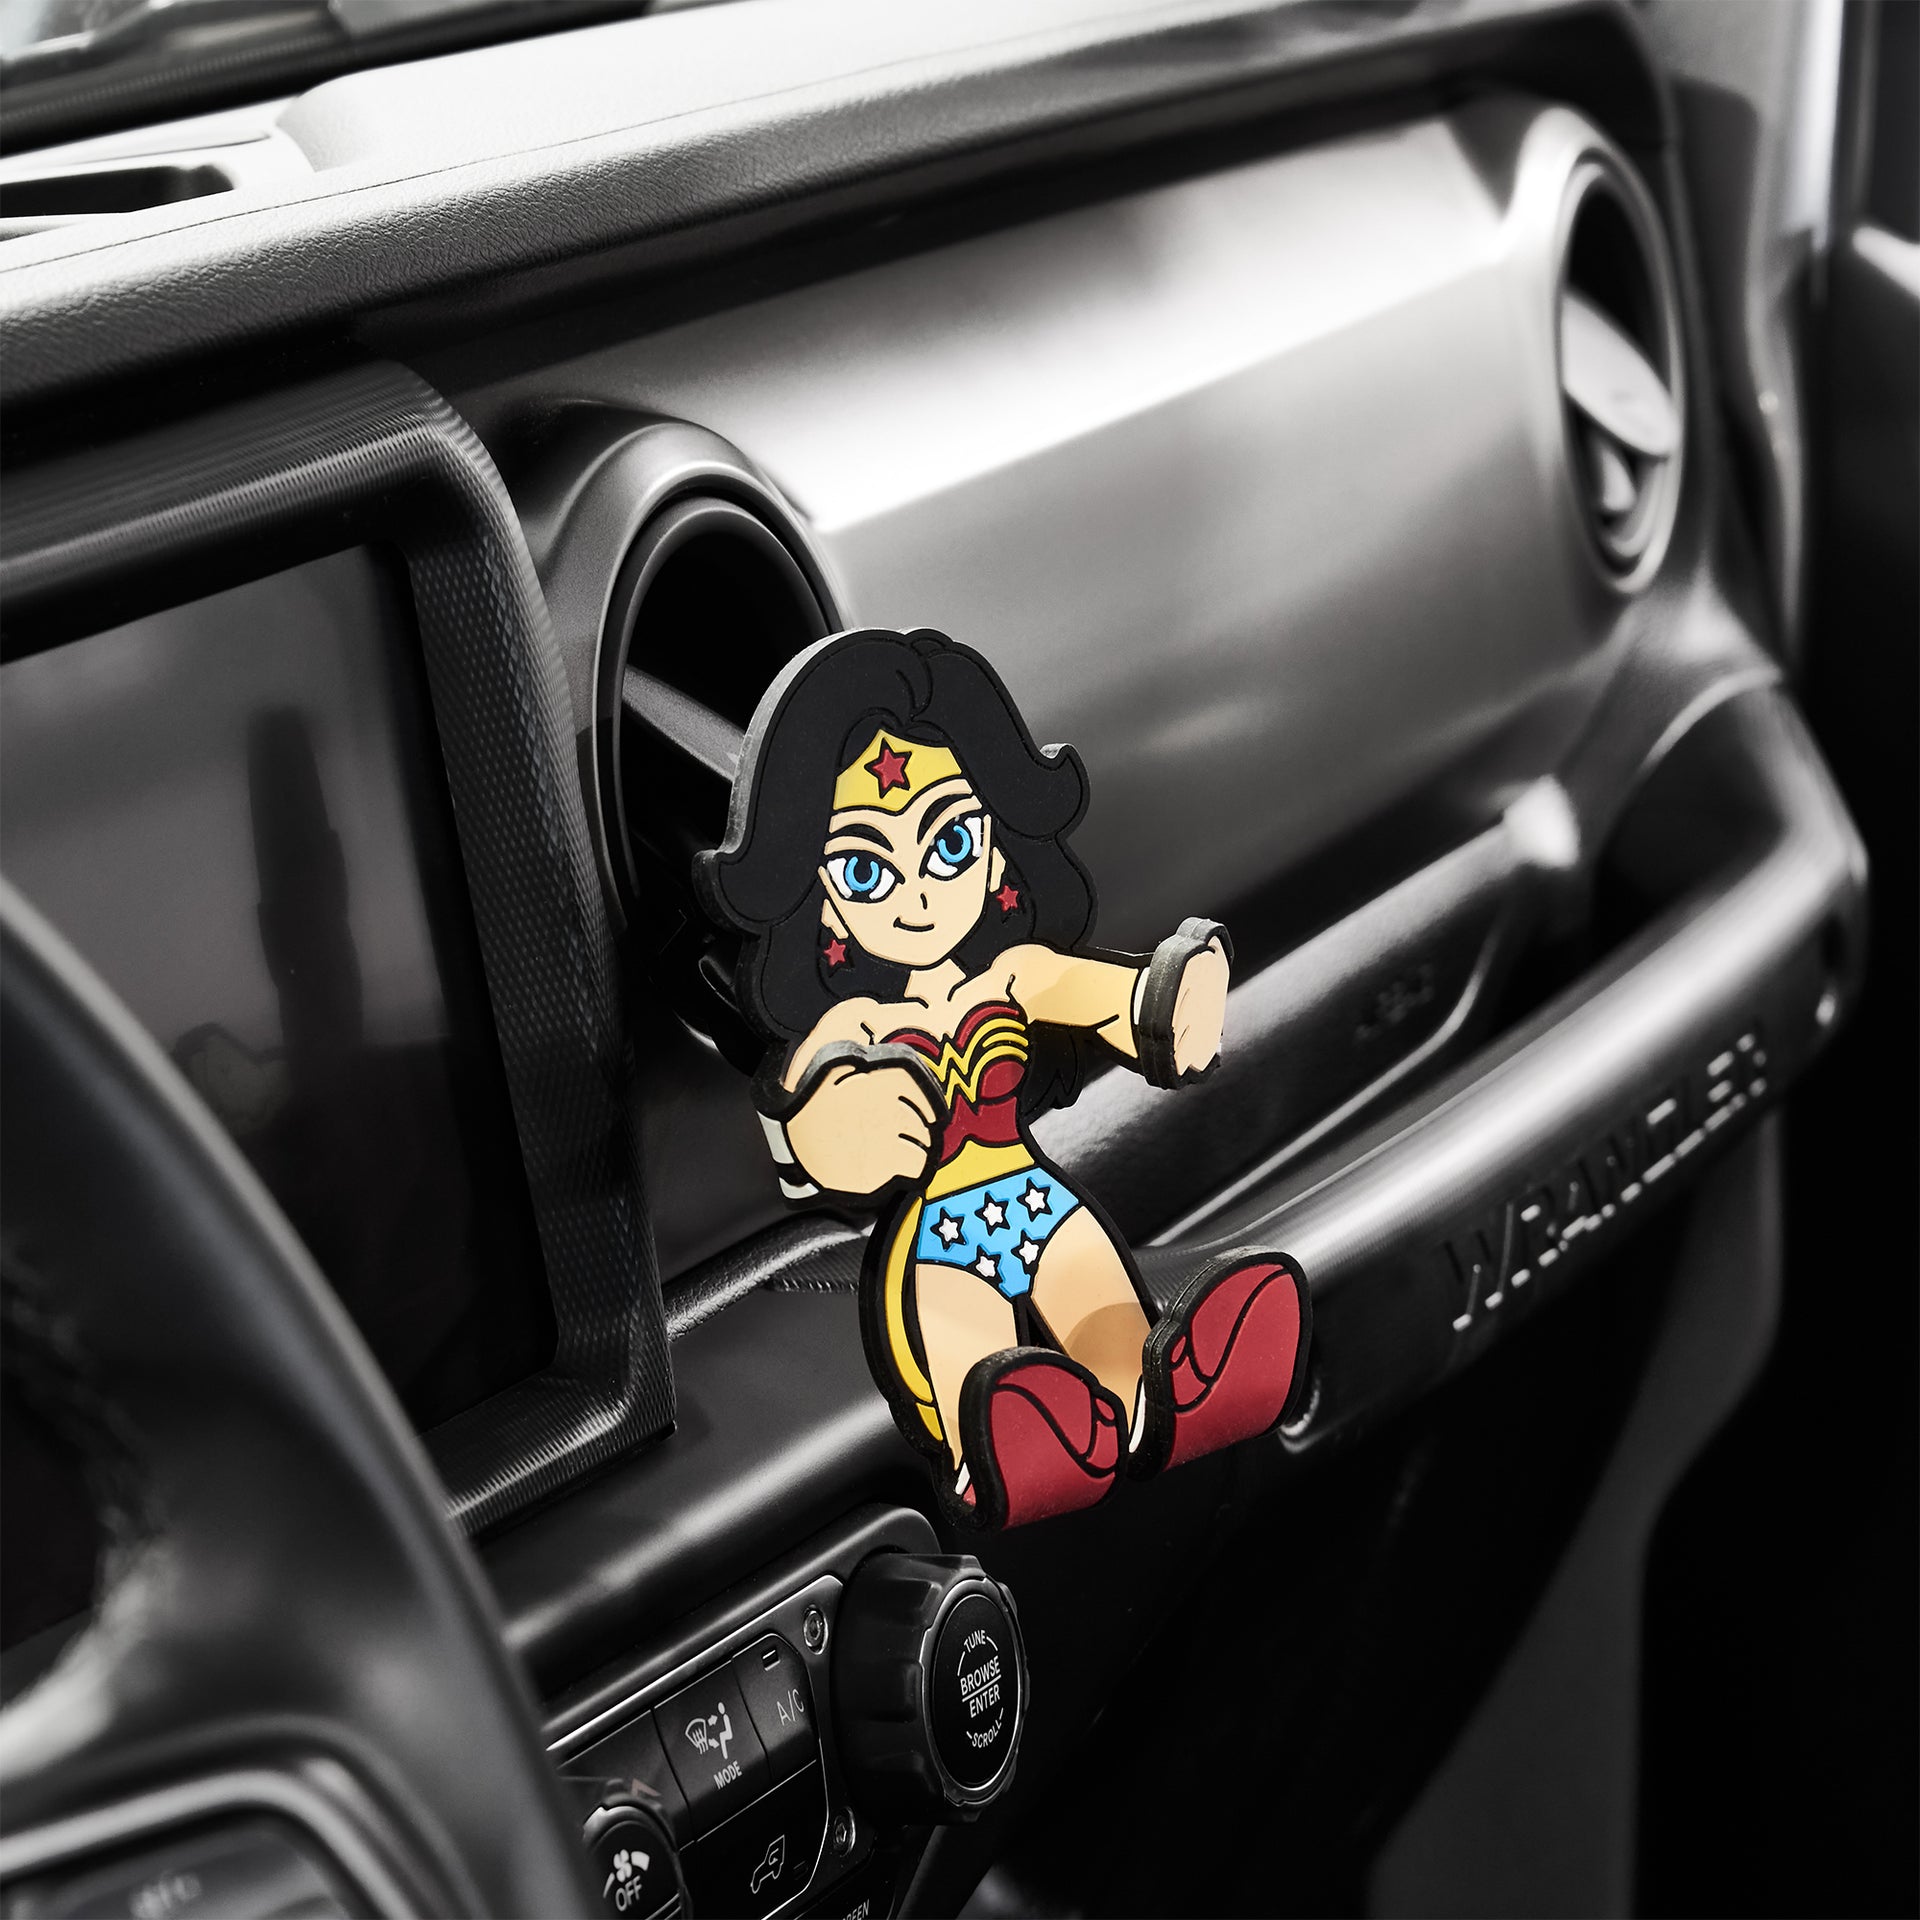 Image of DC Comics Wonder Woman Hug Buddy attached to a car air vent waiting for your cellphone or other smart device to grasp!